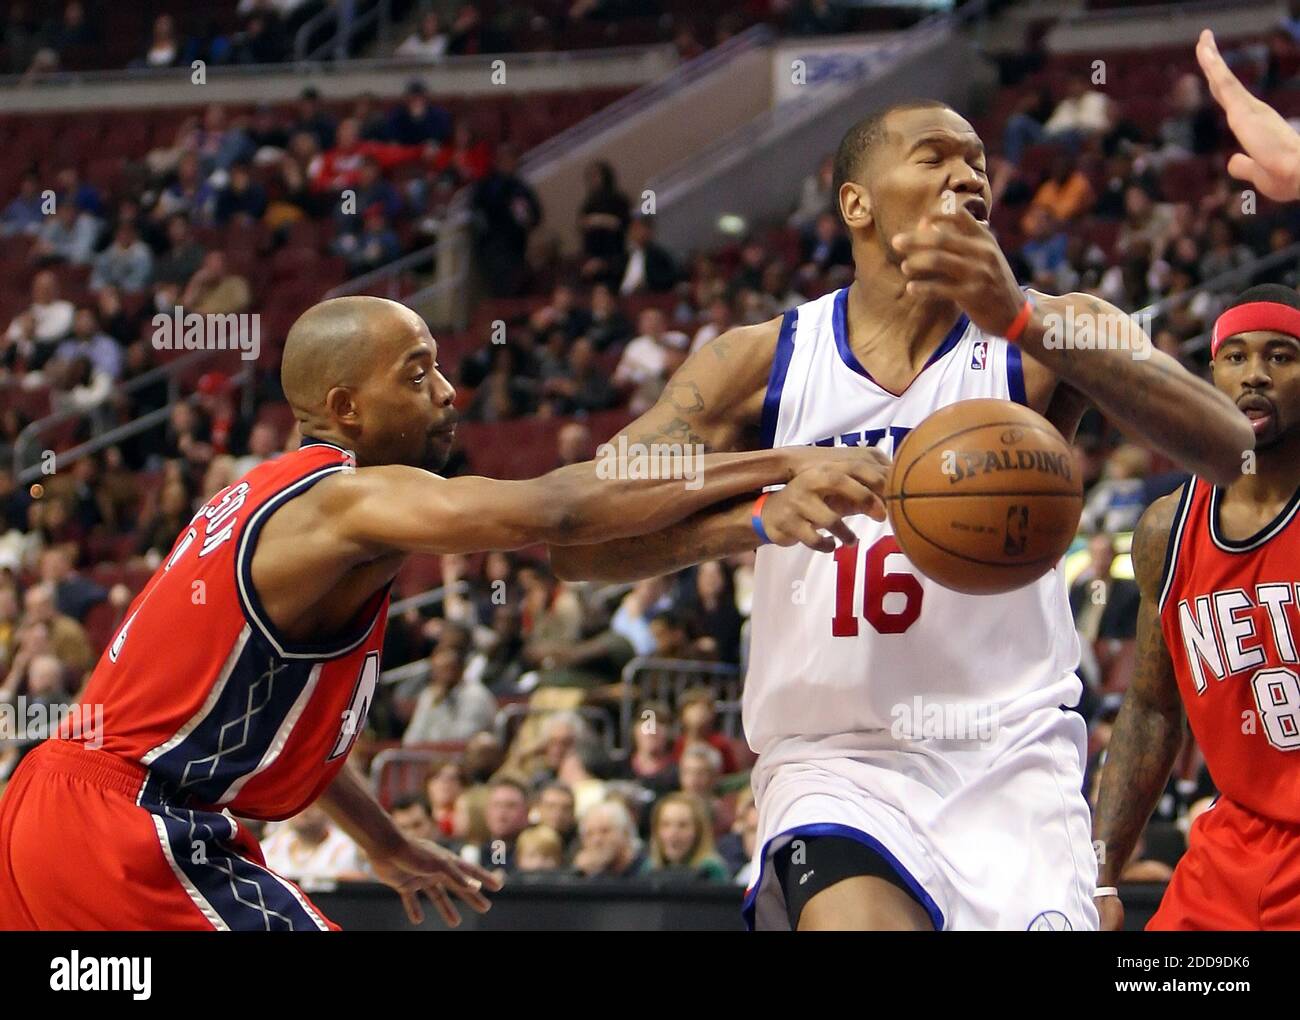 NO FILM, NO VIDEO, NO TV, NO DOCUMENTARY - The Philadelphia 76ers' Marreese Speights (16) has the ball knocked away by the New Jersey Nets' Rafer Alston during the third quarter at the Wachovia Center in Philadelphia, PA, USA on November 6, 2009. The Sixers defeated the Nets, 97-94. Photo by Steven M. Falk/Philadelphia Daily News/MCT/Cameleon/ABACAPRESS.COM Stock Photo